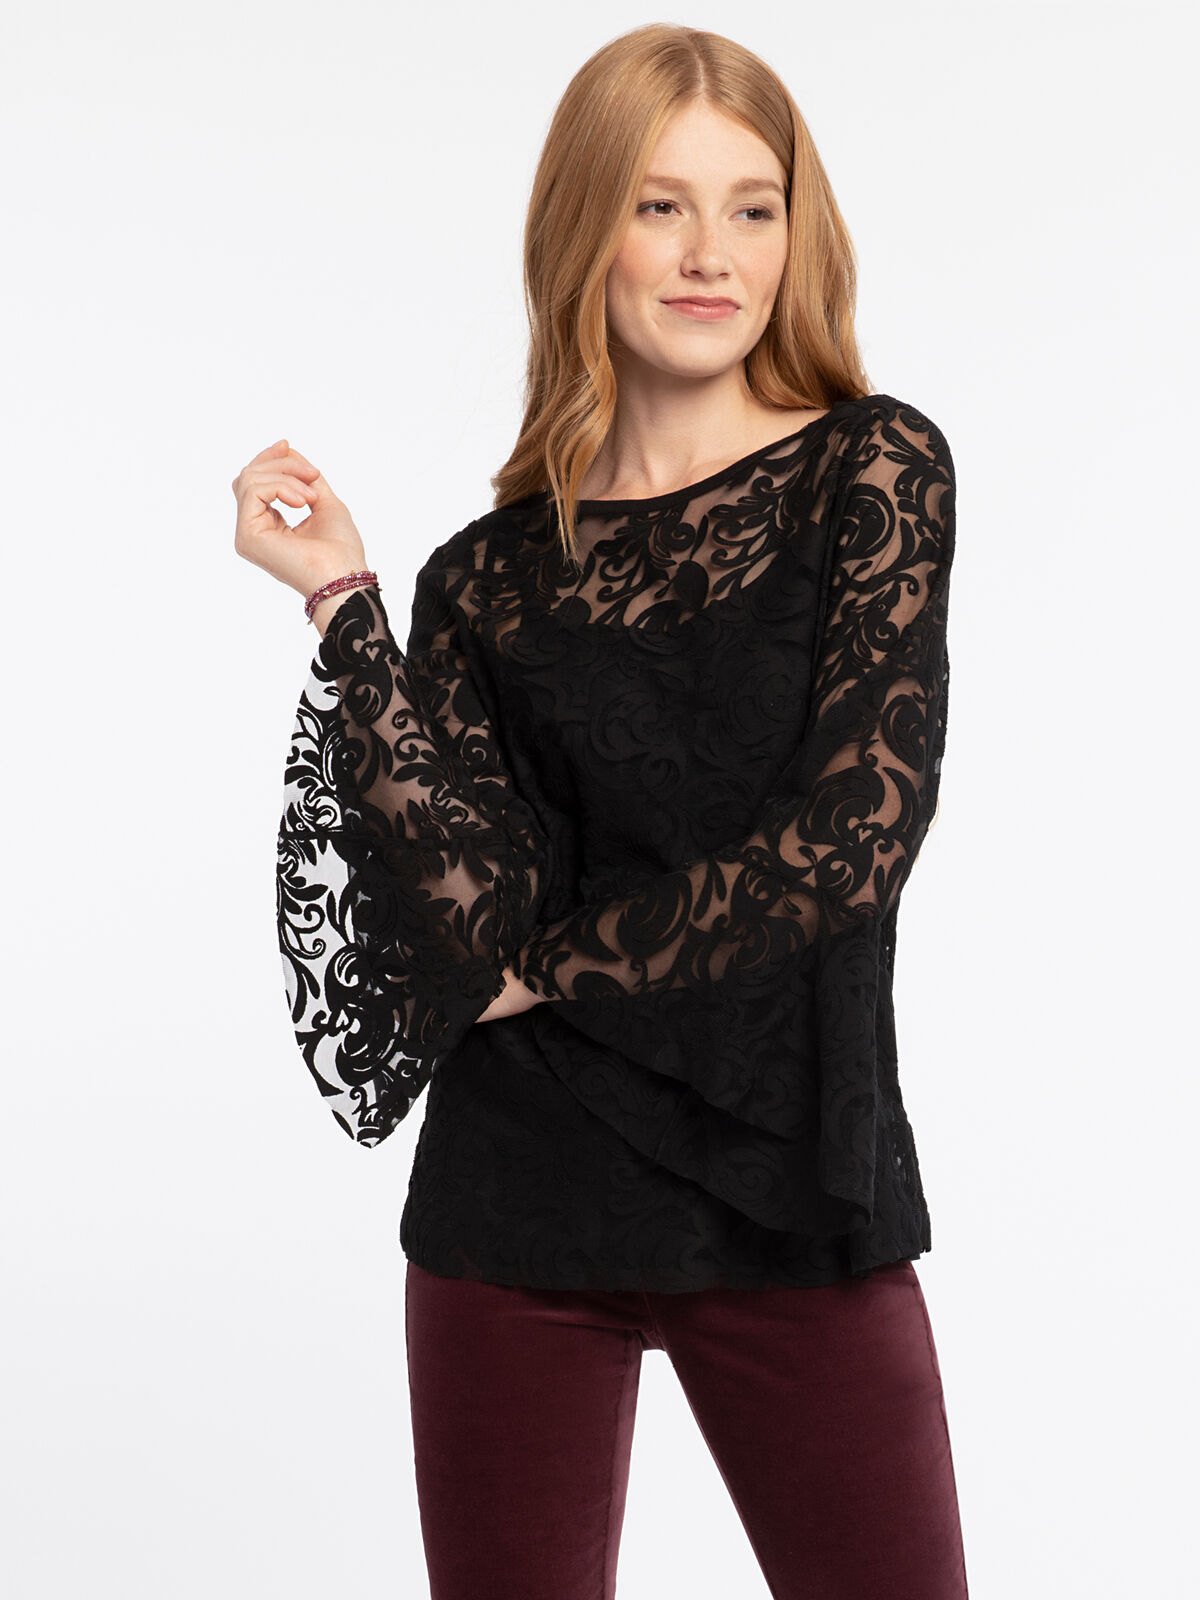 Lovely Lace Top